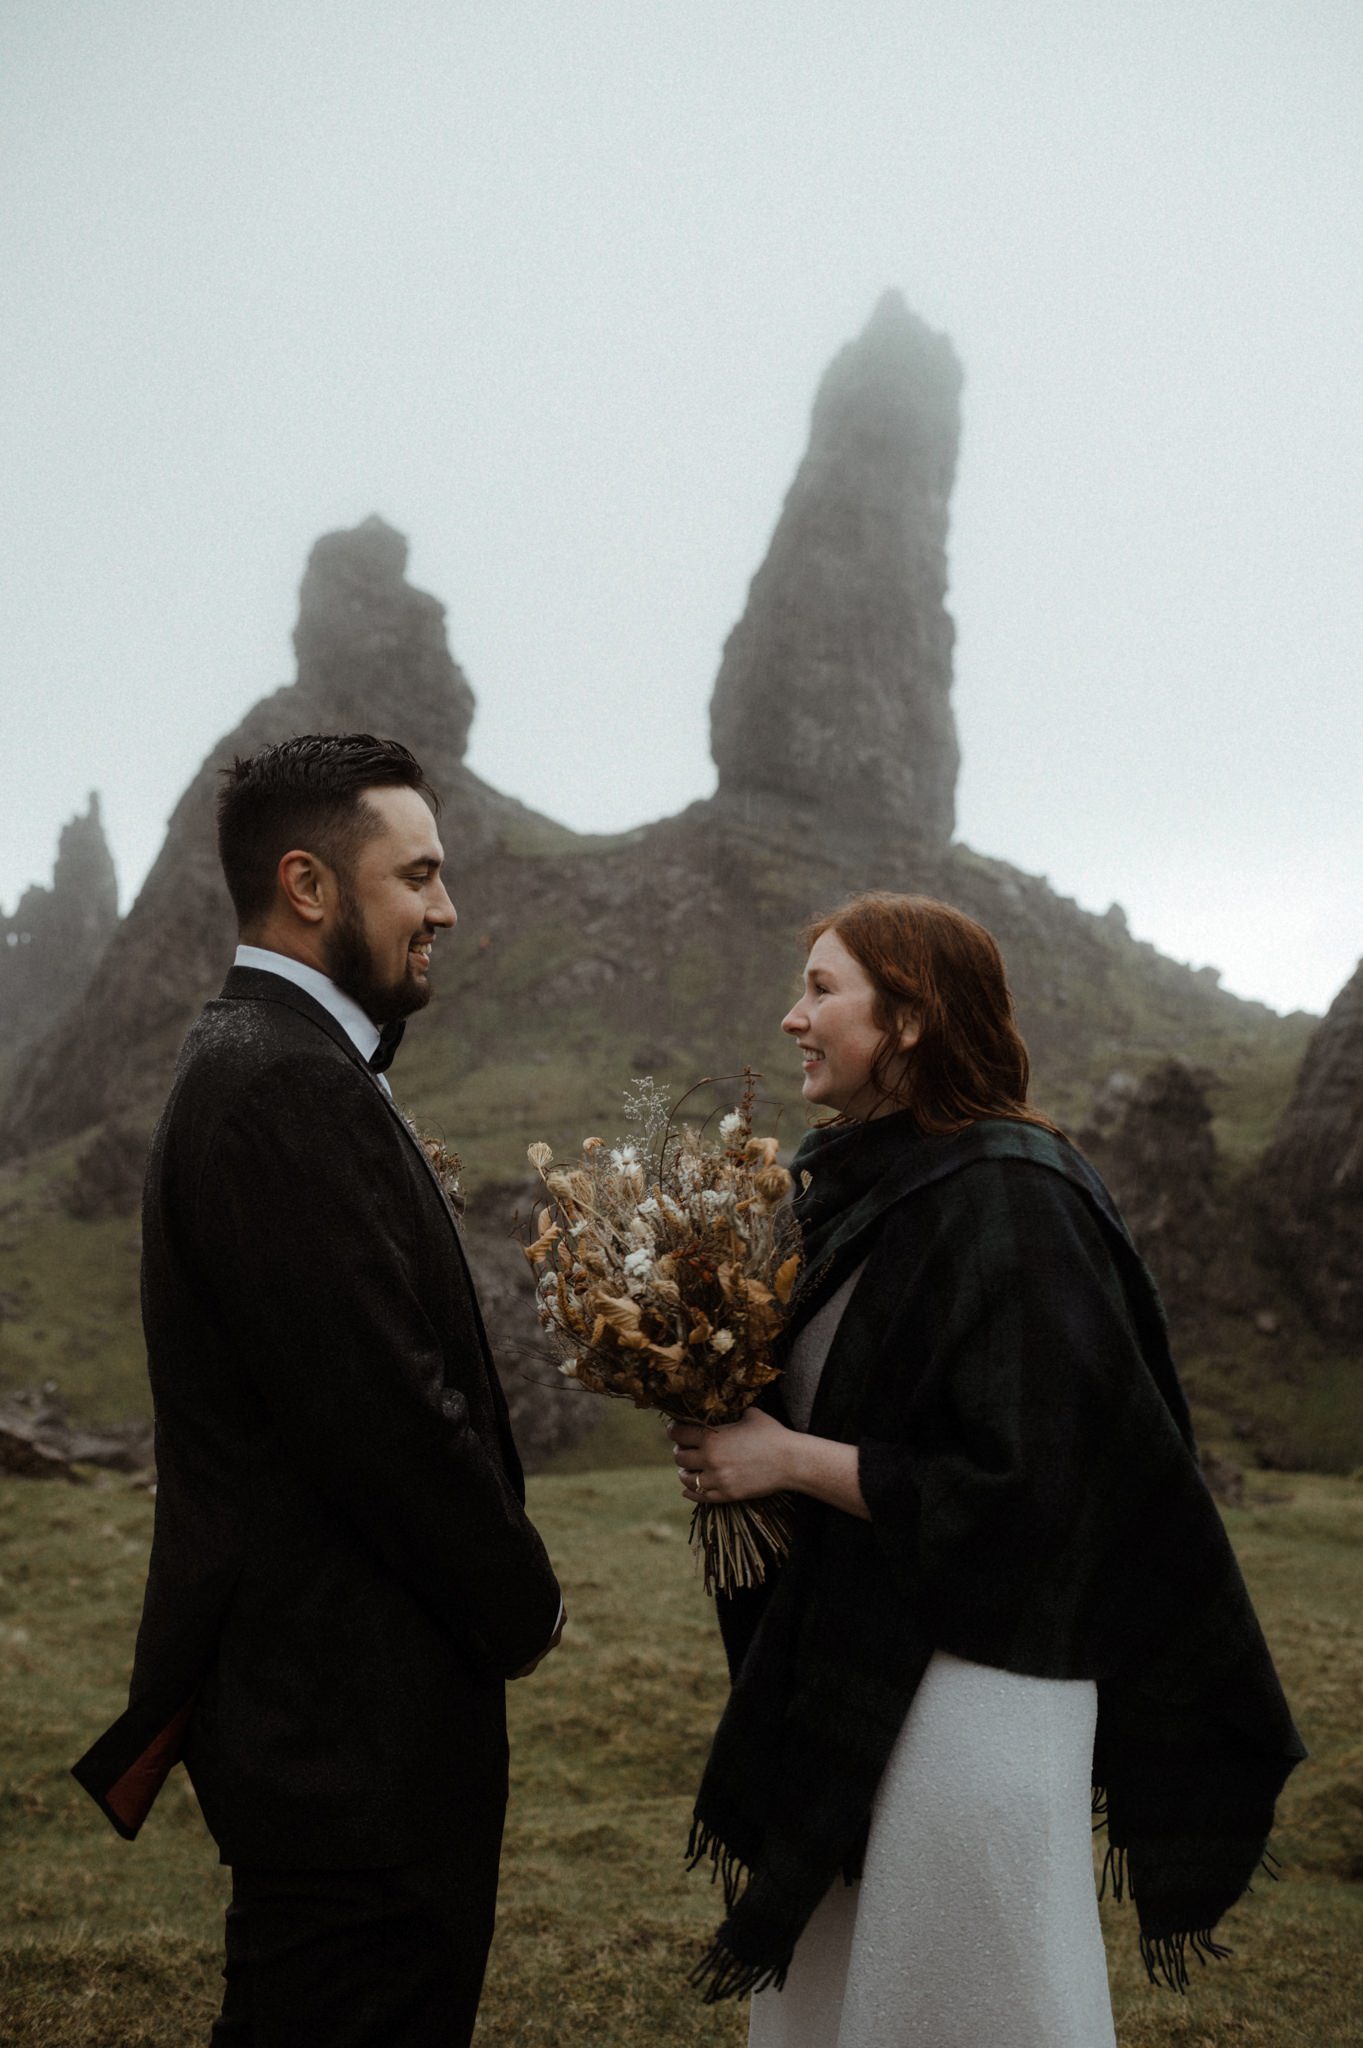 A wedding taking place in Scotland outdoors in the rain